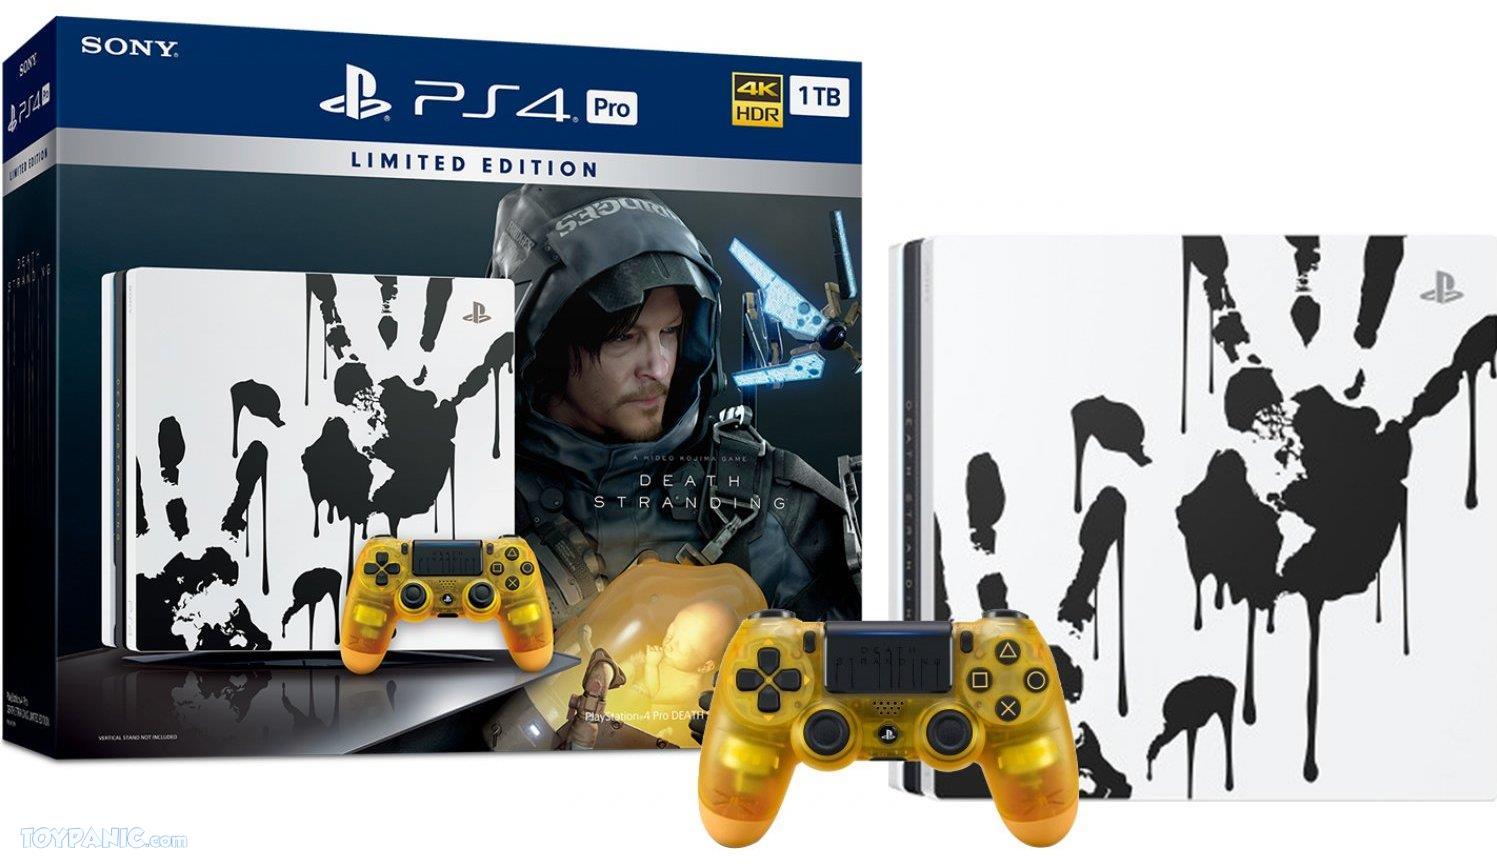 4 Pro 1tb Limited Edition Death Stranding Console on Sale, 59% xevietnam.com